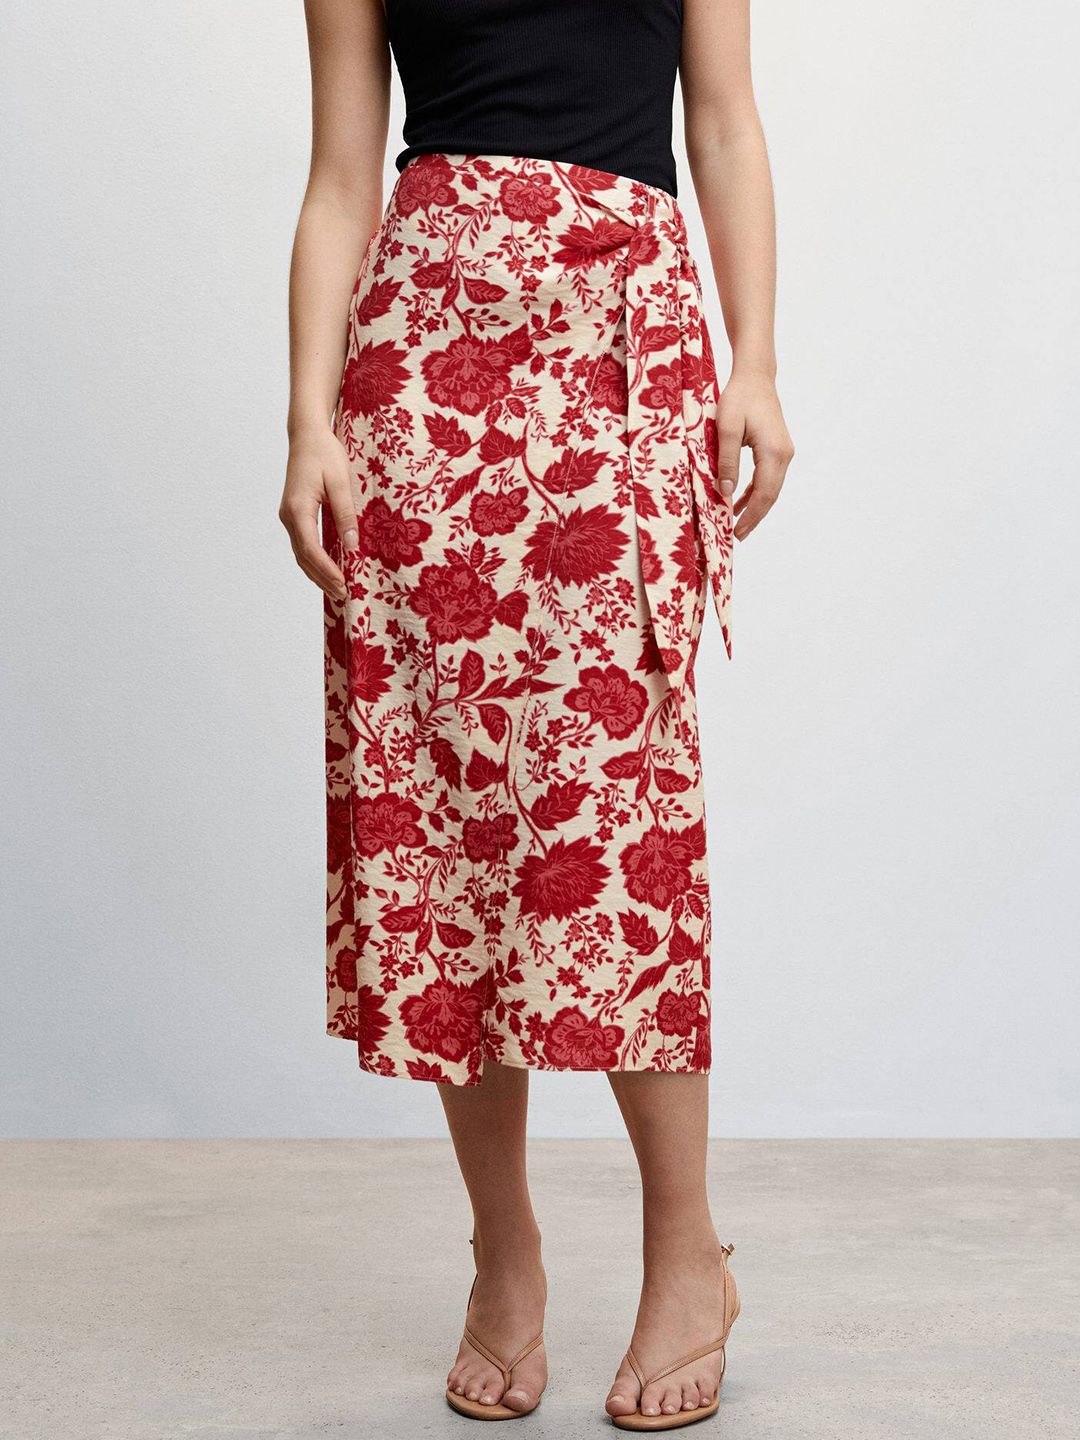 MANGO Waist Tie-Up Floral Print Wrap Skirt Price in India